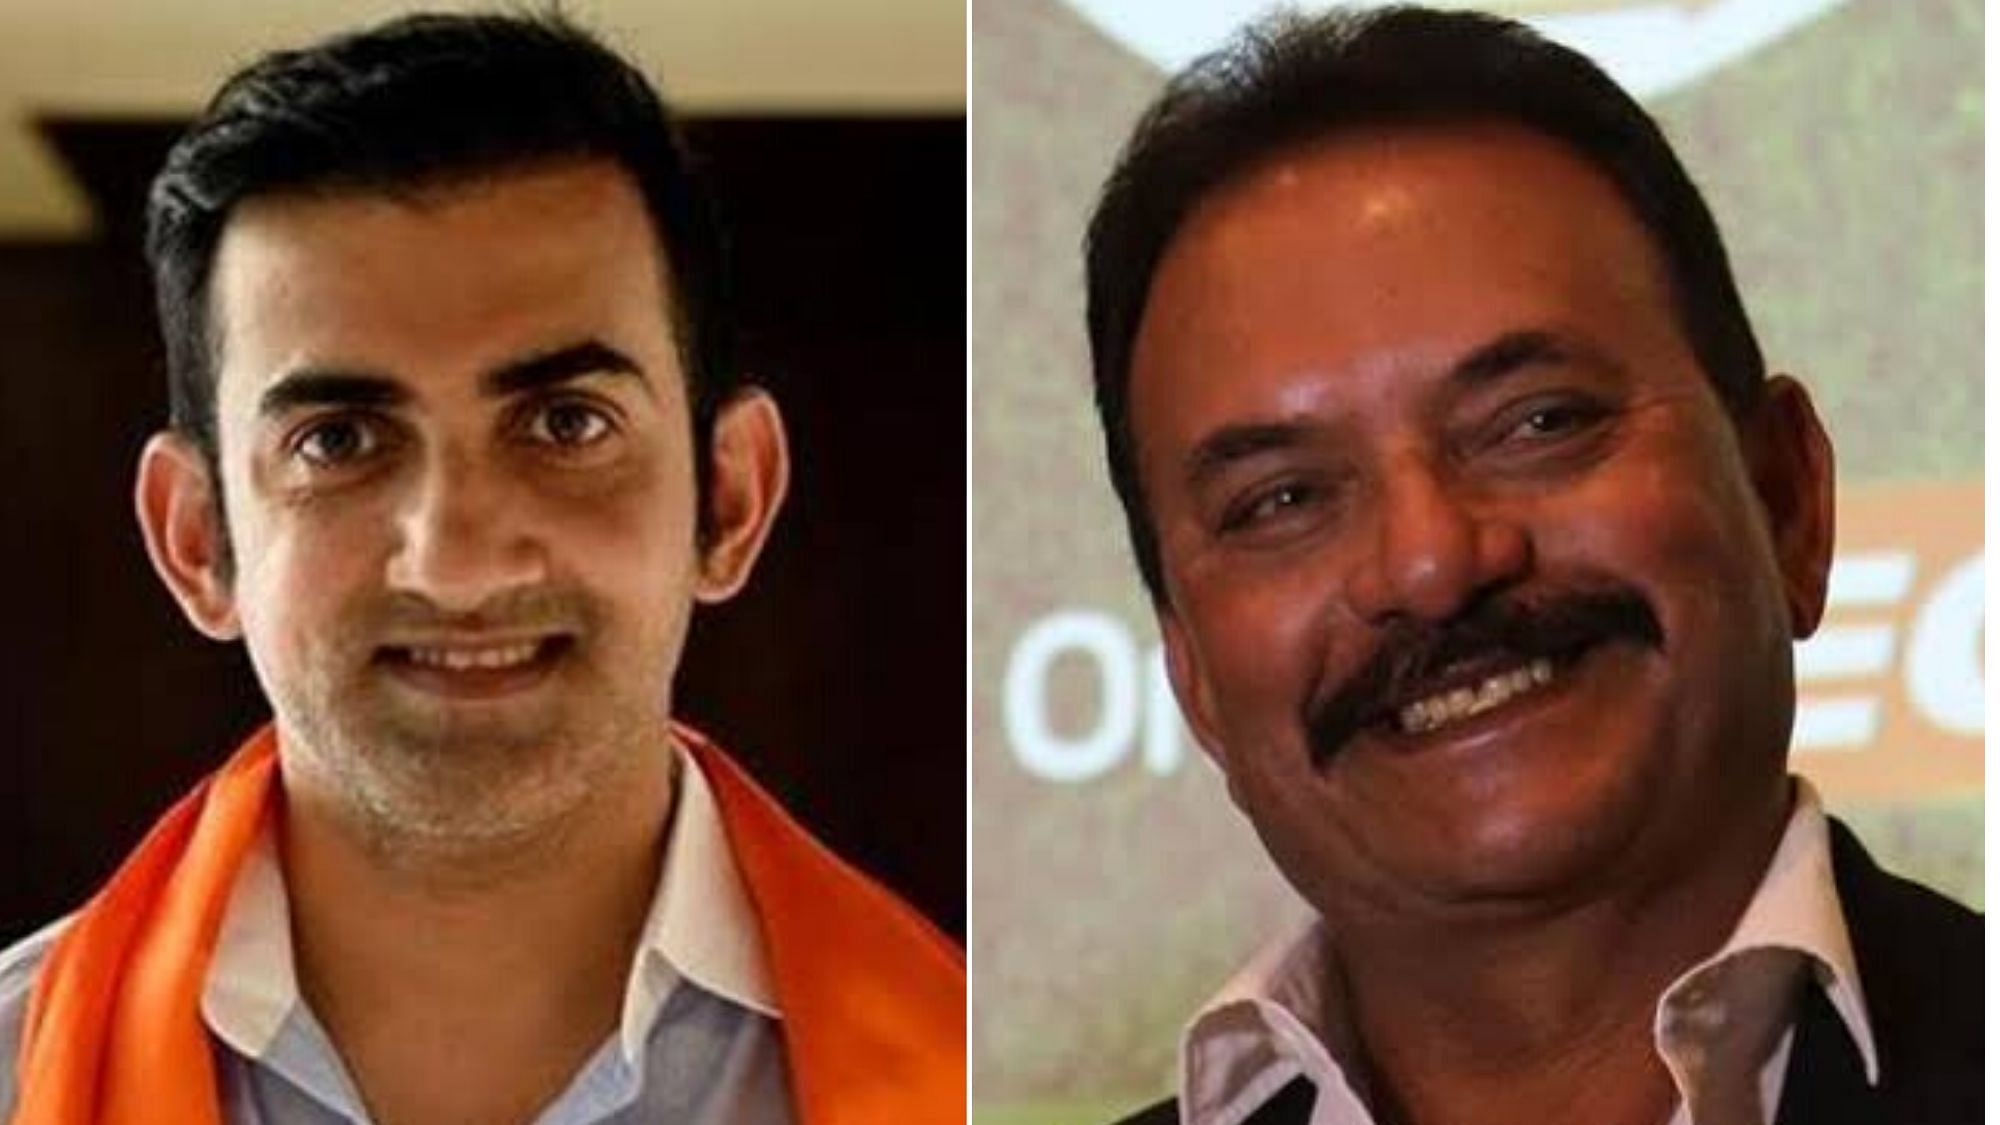 The BCCI is all set to appoint World Cup winning former India players Madan Lal and Gautam Gambhir as members of the Cricket Advisory Committee (CAC) which will pick selection committees for the next four-year cycle starting 2020.